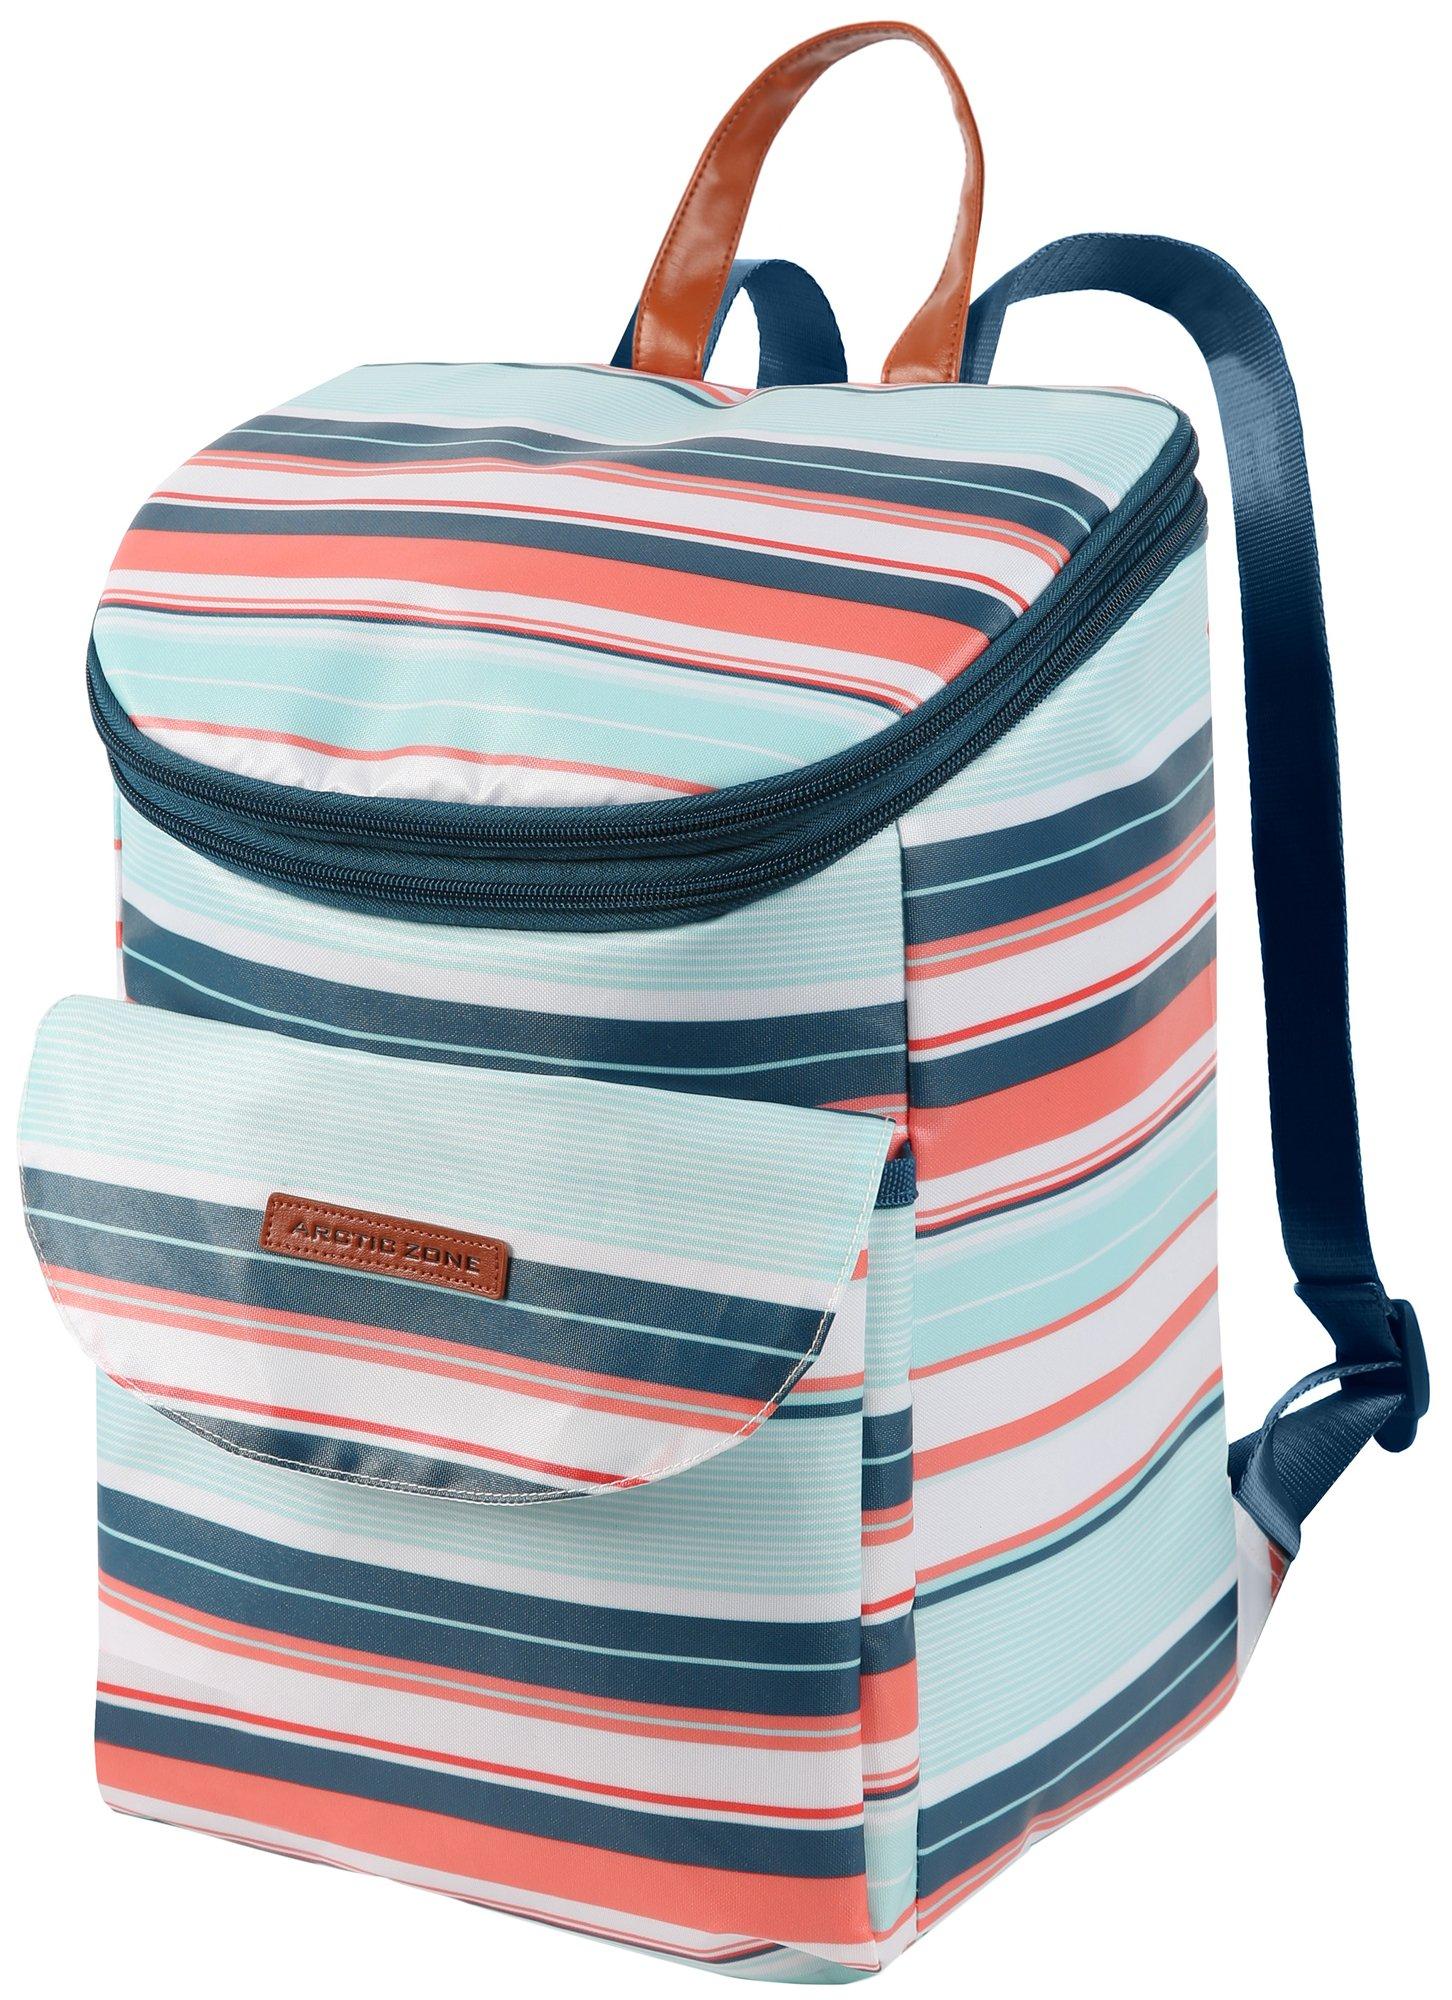 Arctic Zone 24 Can Backpack Cooler